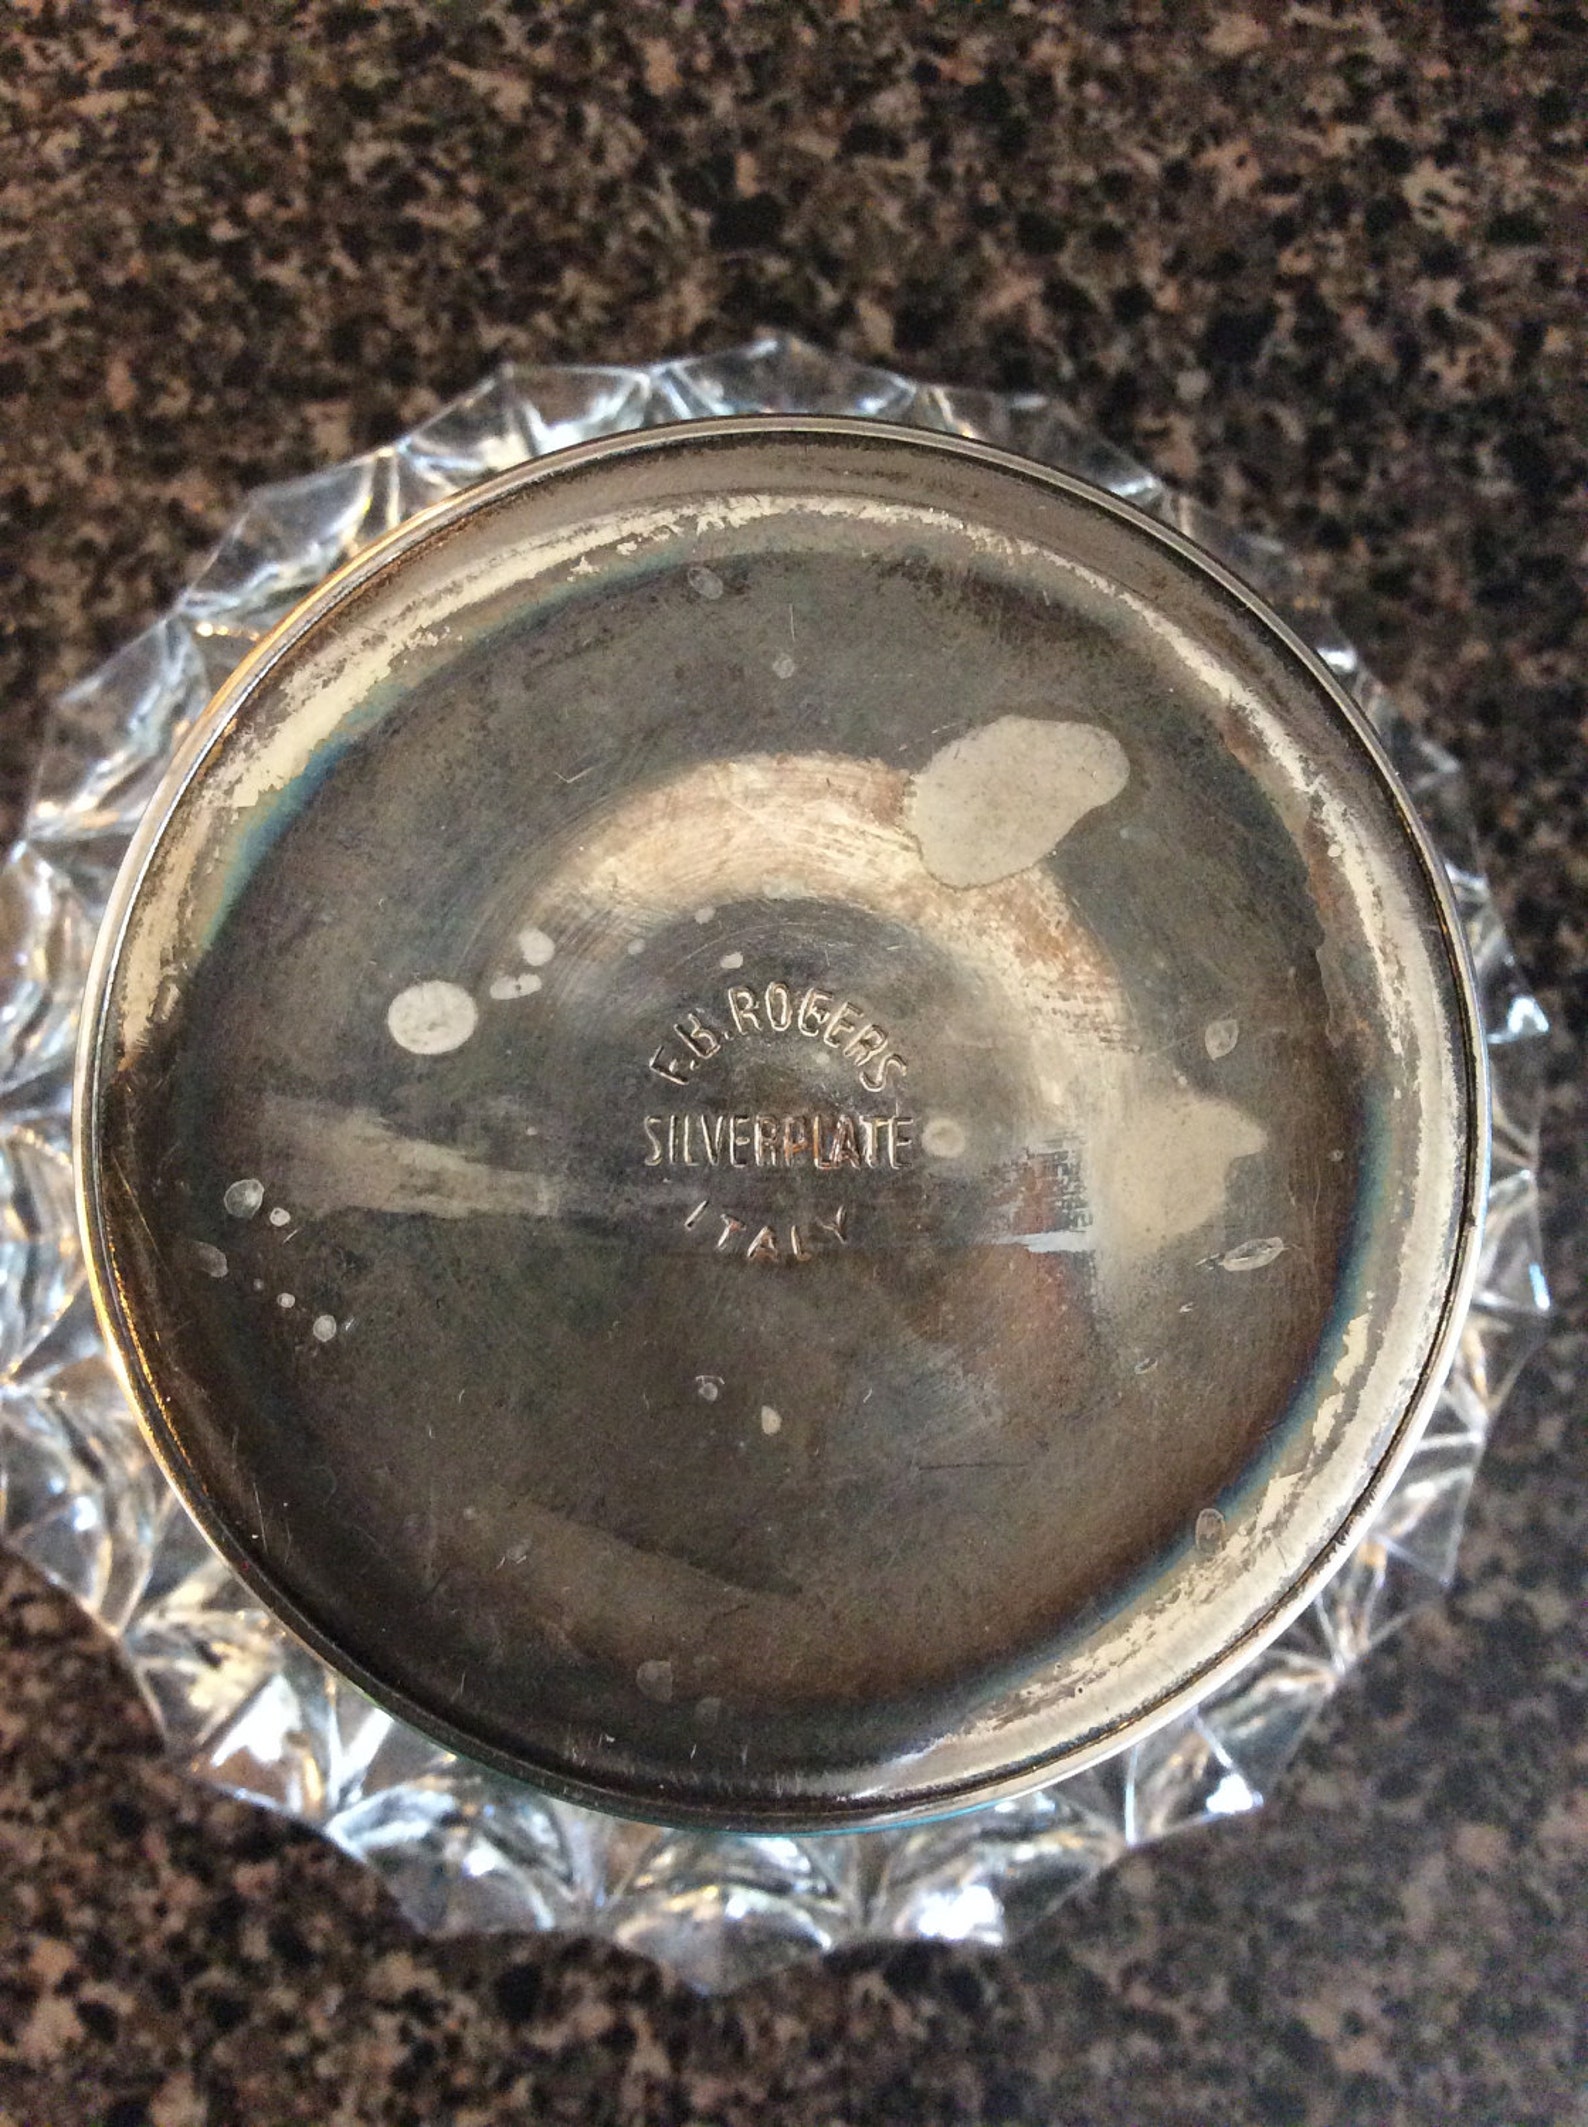 FB Rogers Silverplate Italy Ashtray/vintage/pedestal - Etsy